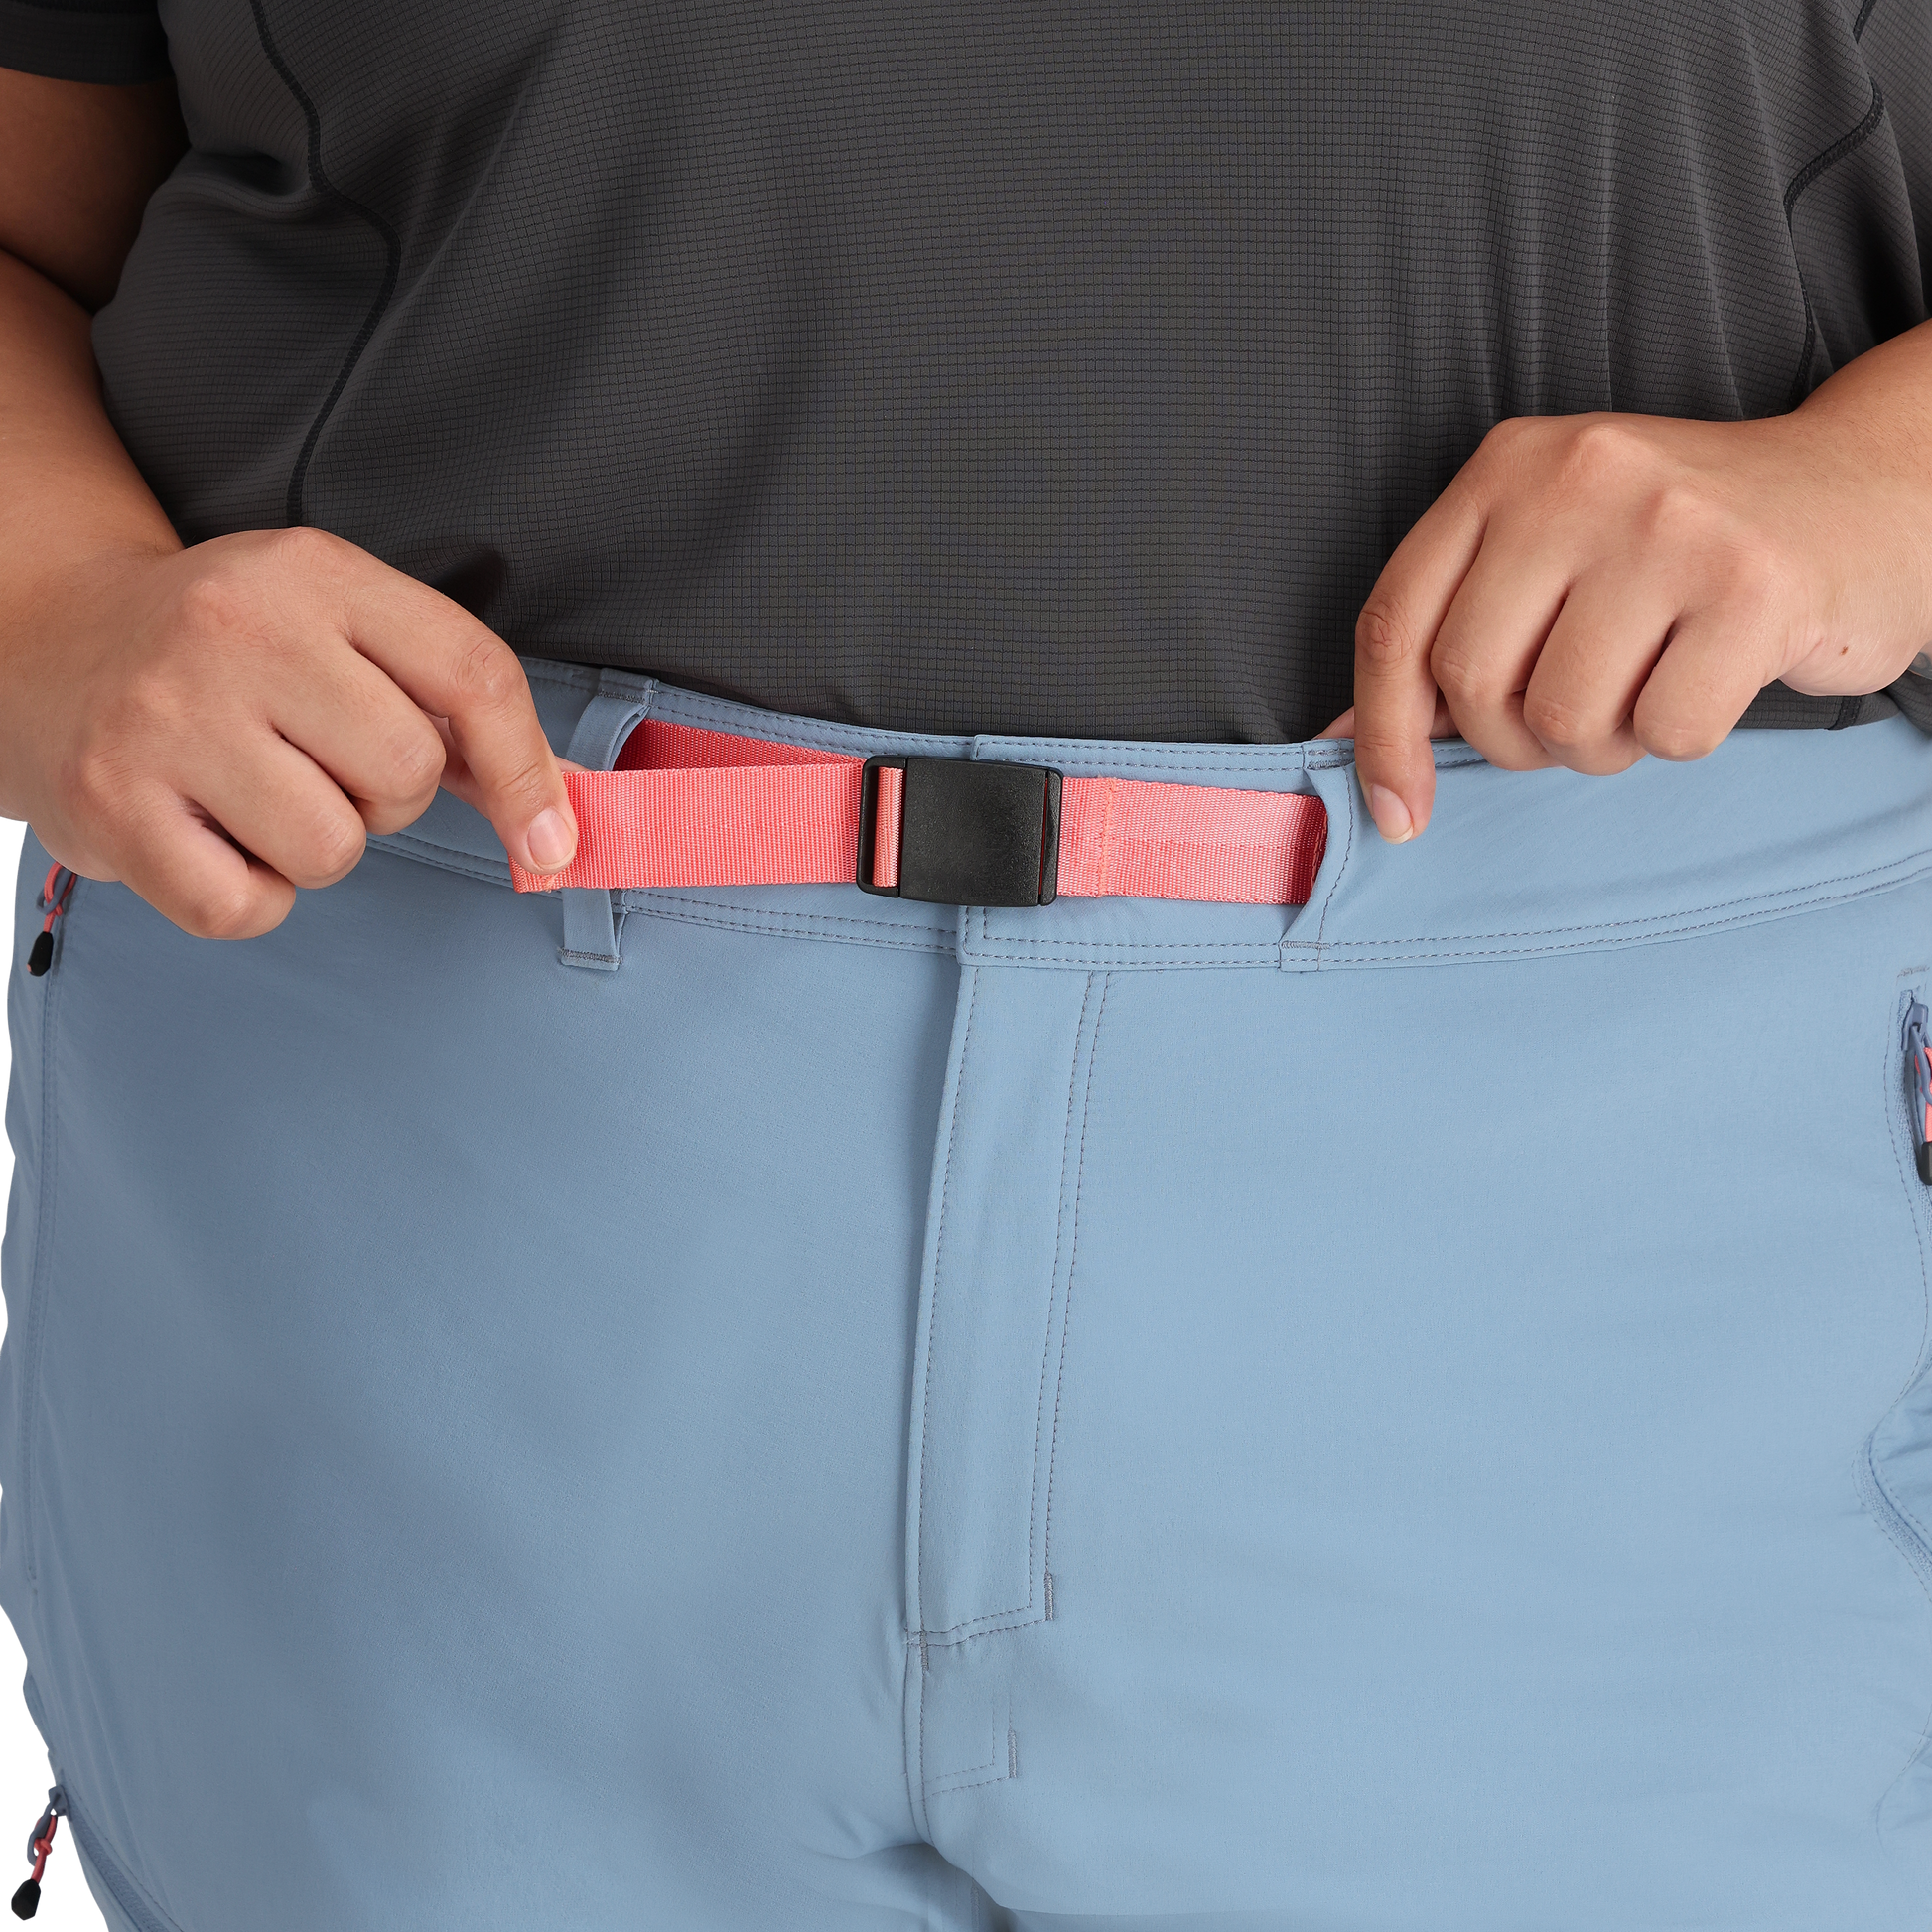 B1 :: Waistband Detail with Adjustable Belt /  Adjust belt as needed for your desired fit.